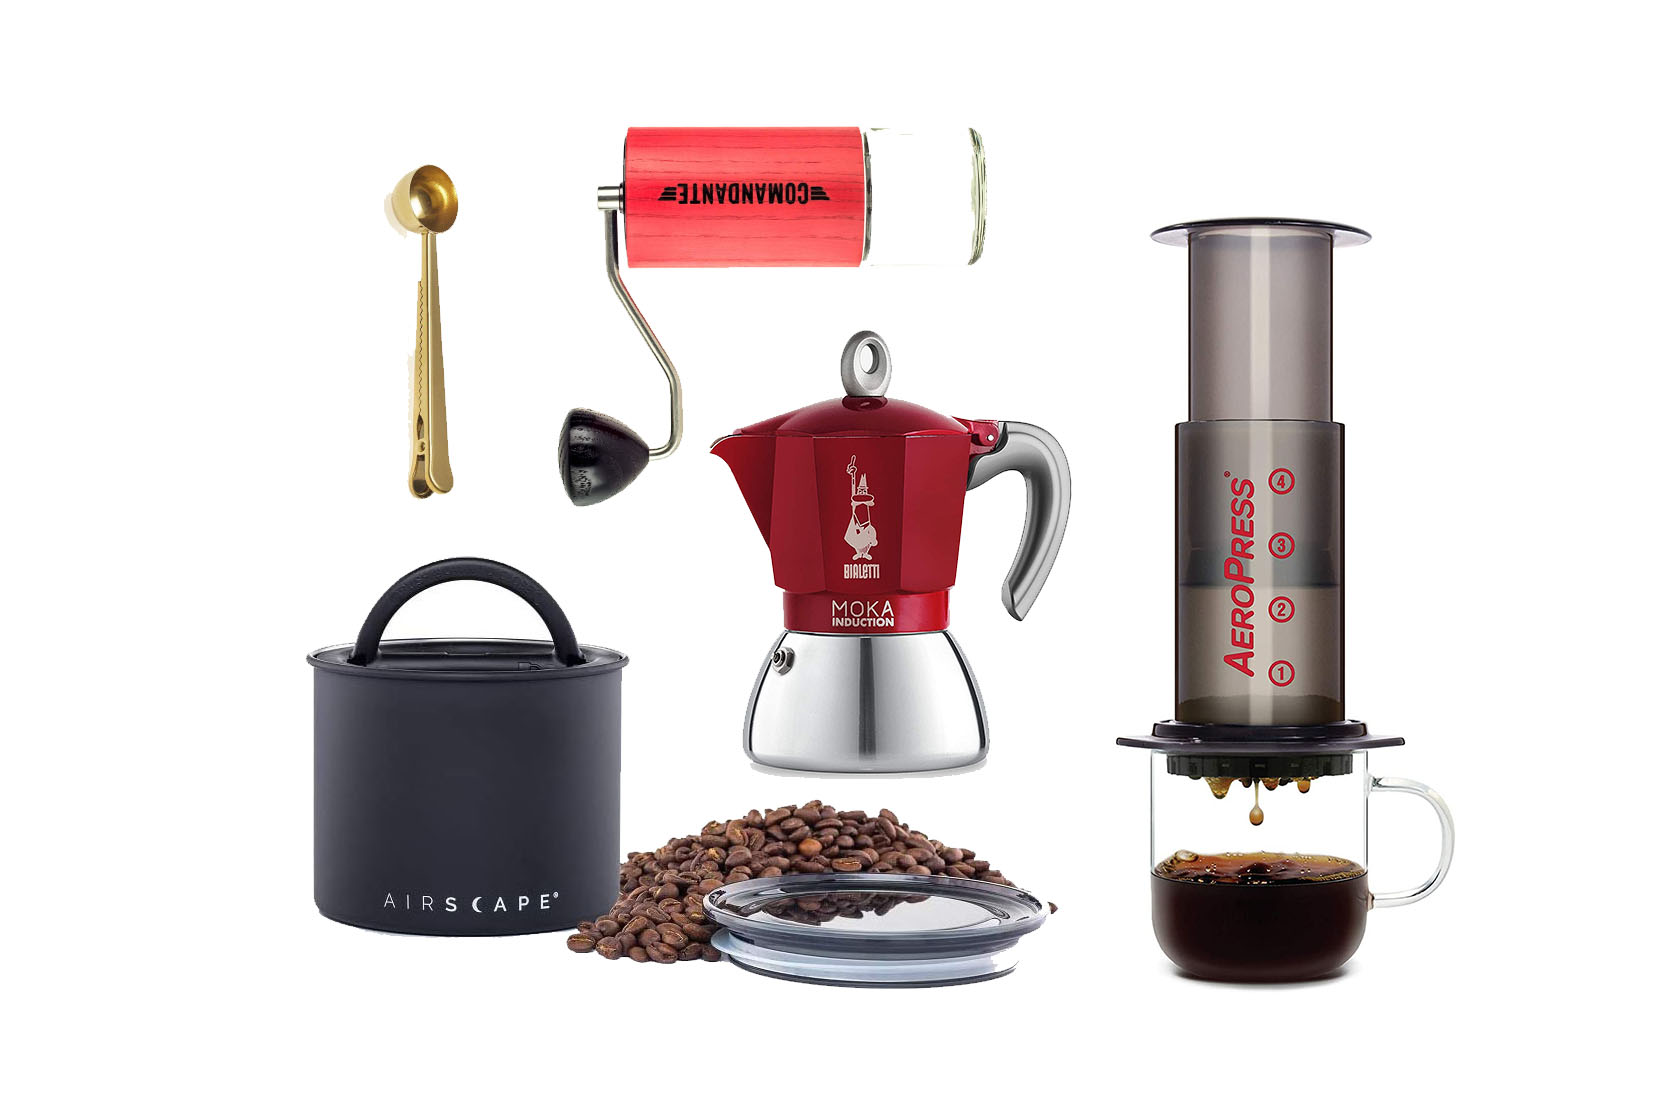 The 20 best coffee gadgets for the perfect cup » Gadget Flow